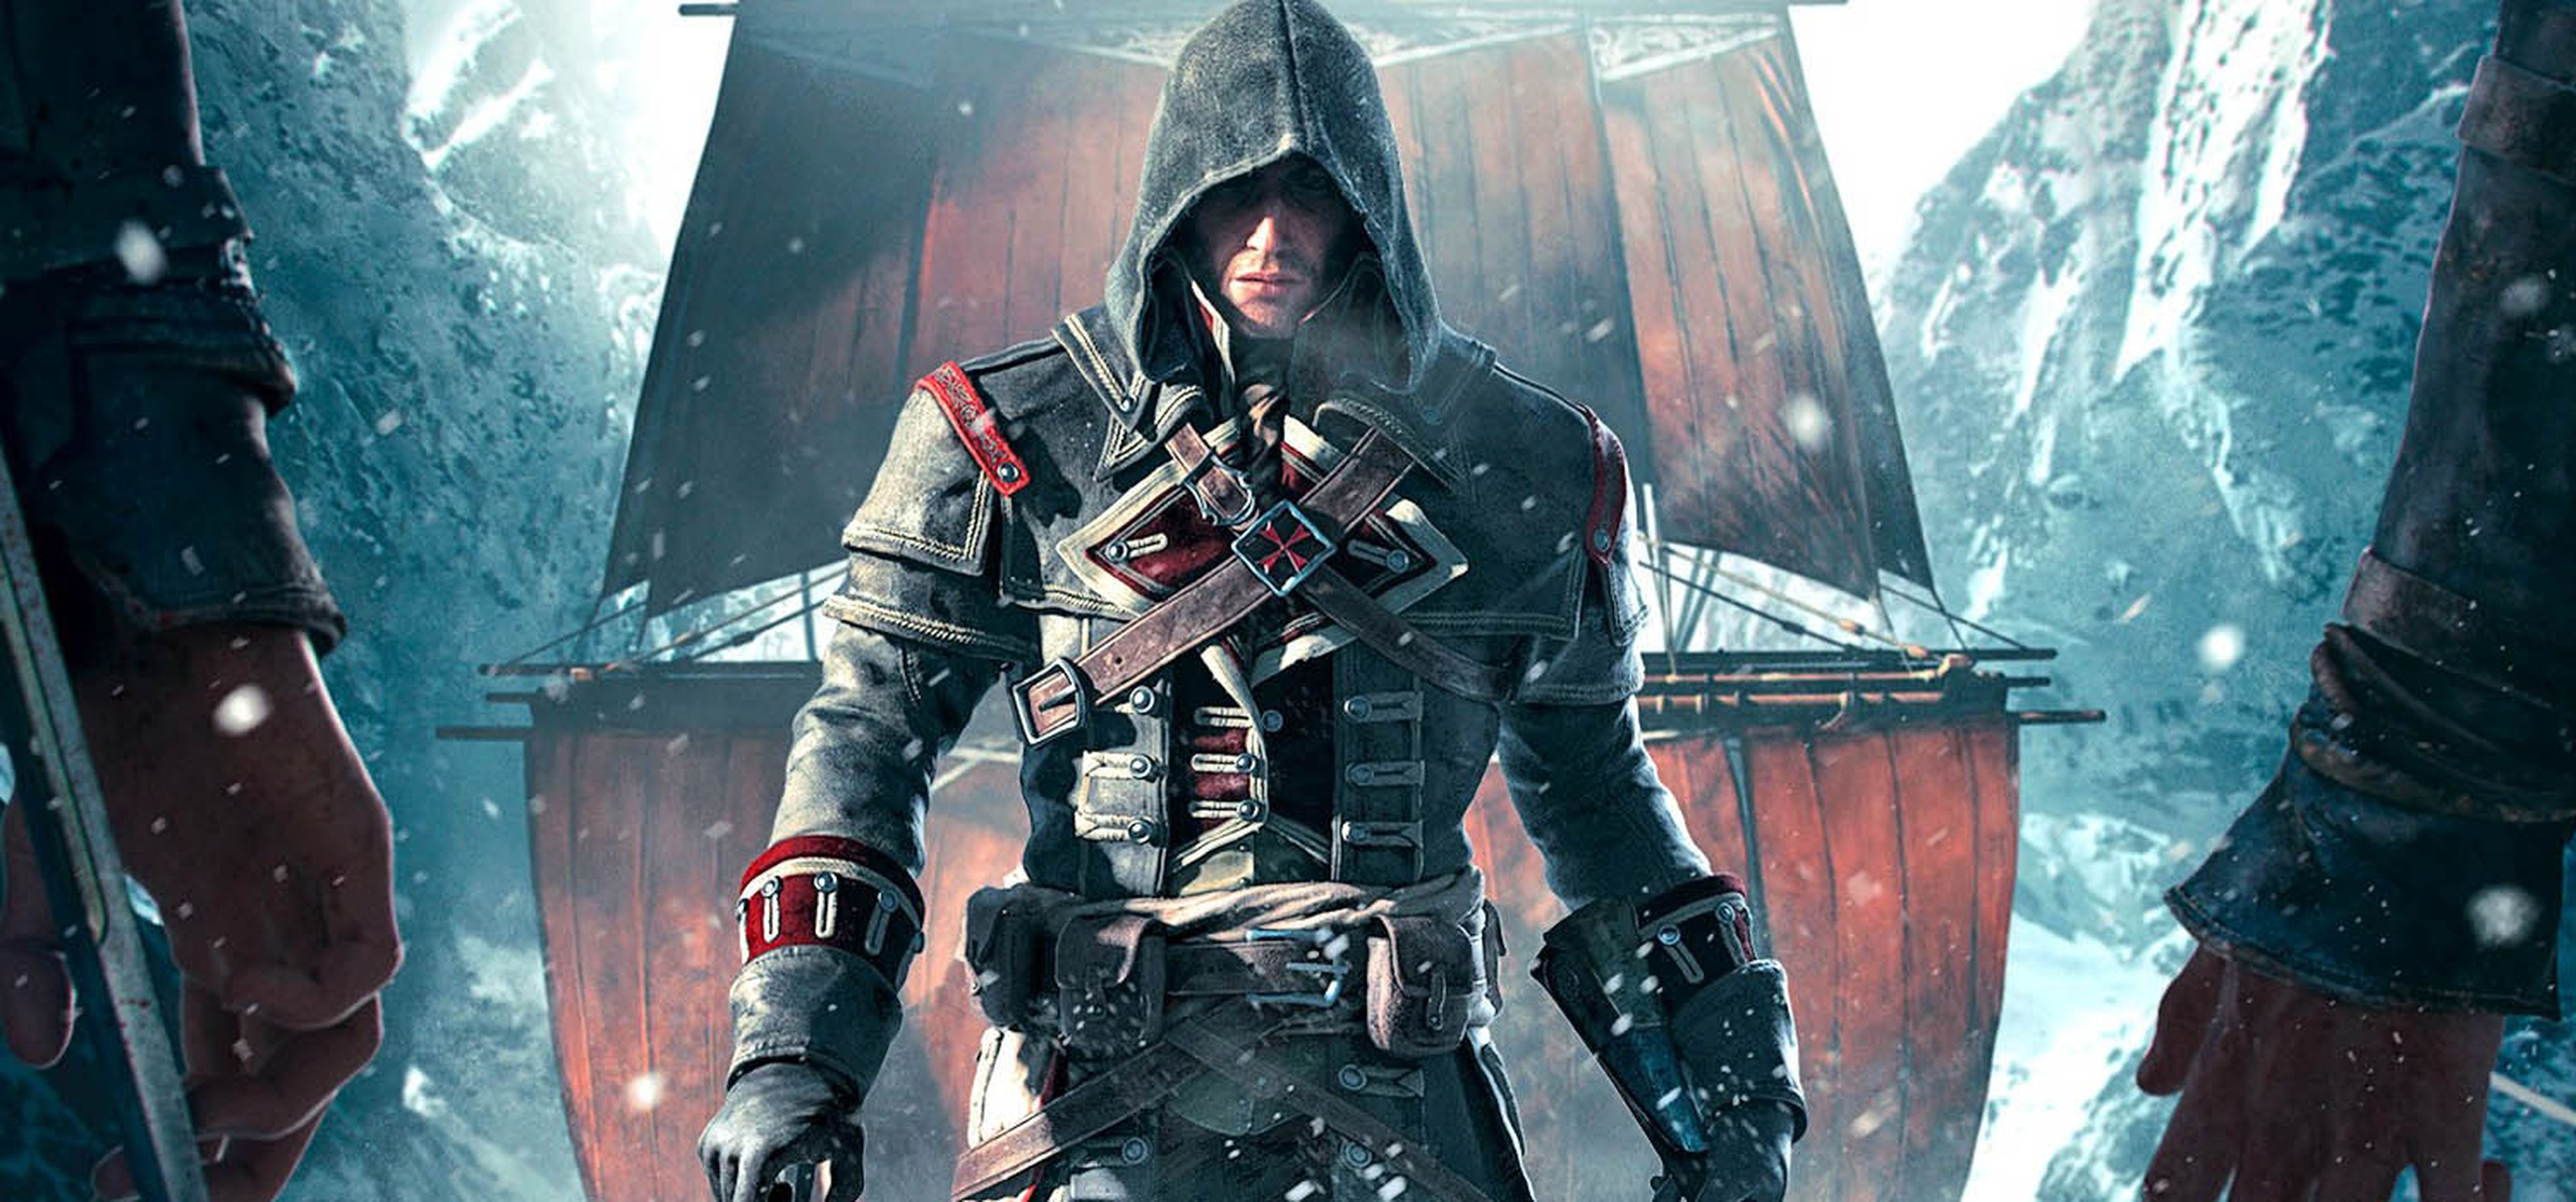 Assassins Creed Rogue HD Xbox One